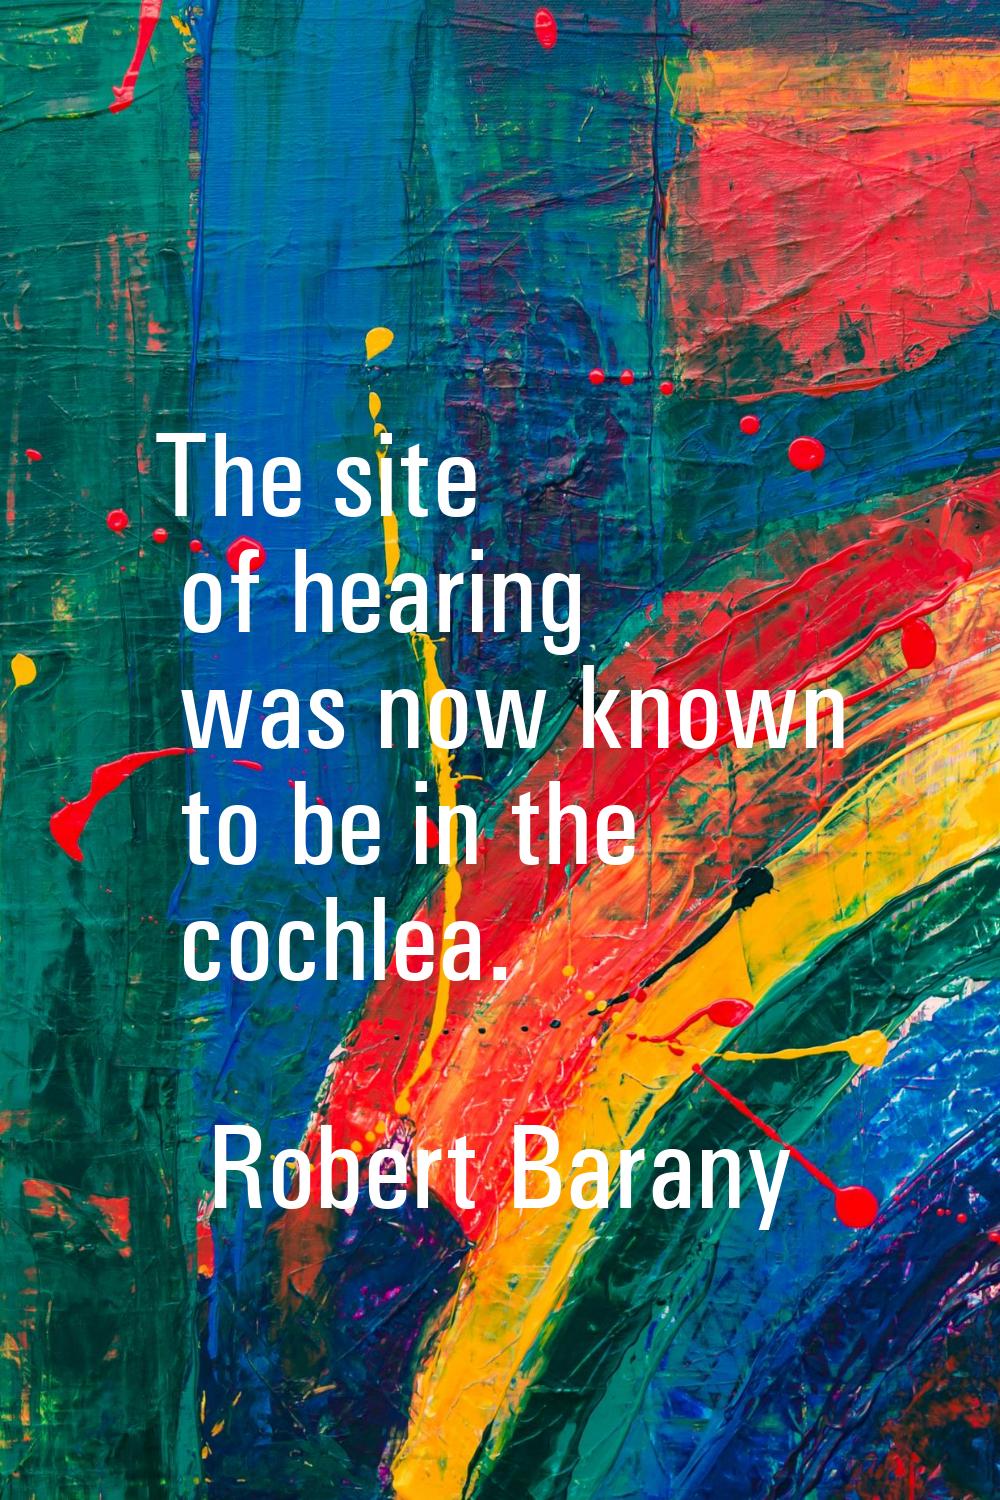 The site of hearing was now known to be in the cochlea.